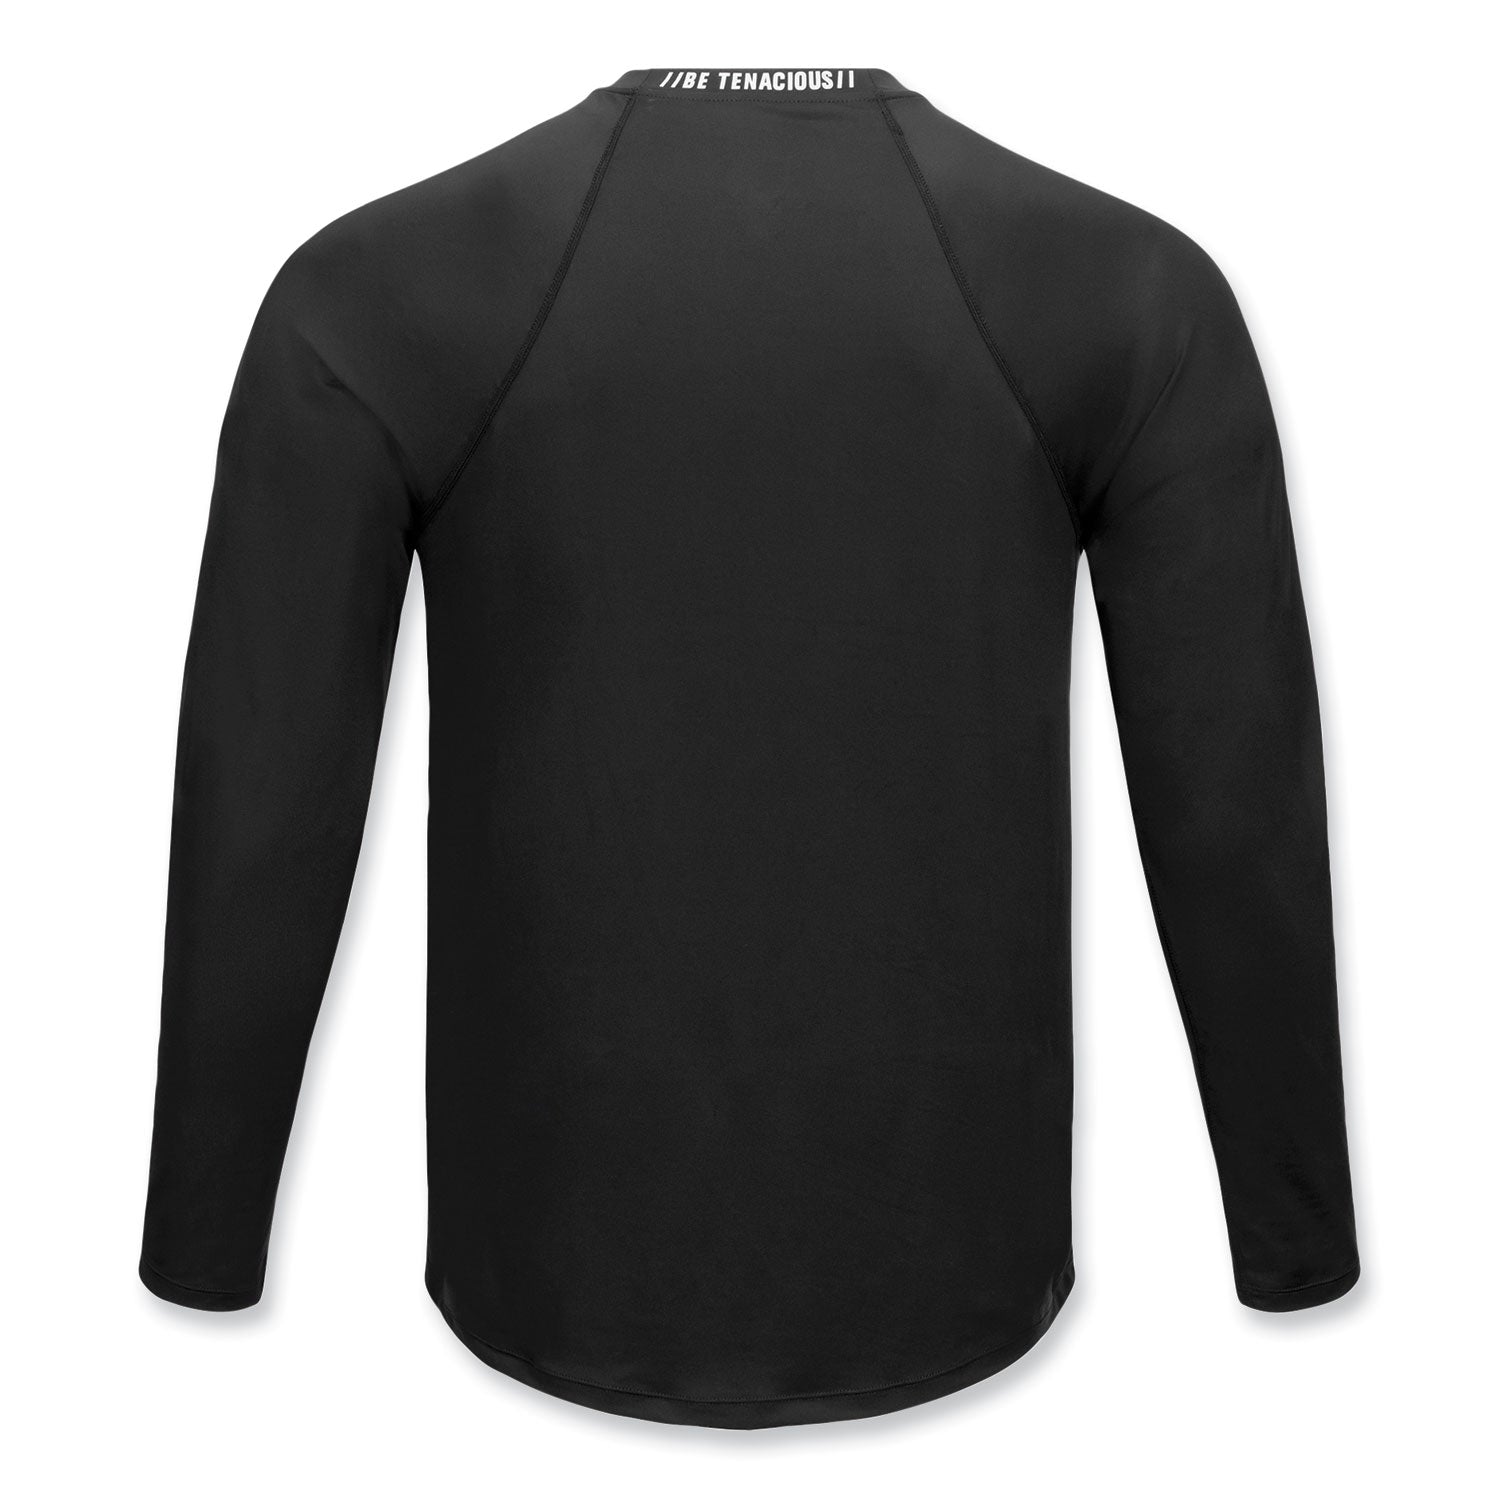 n-ferno-6436-long-sleeve-lightweight-base-layer-shirt-2x-large-black-ships-in-1-3-business-days_ego40236 - 2